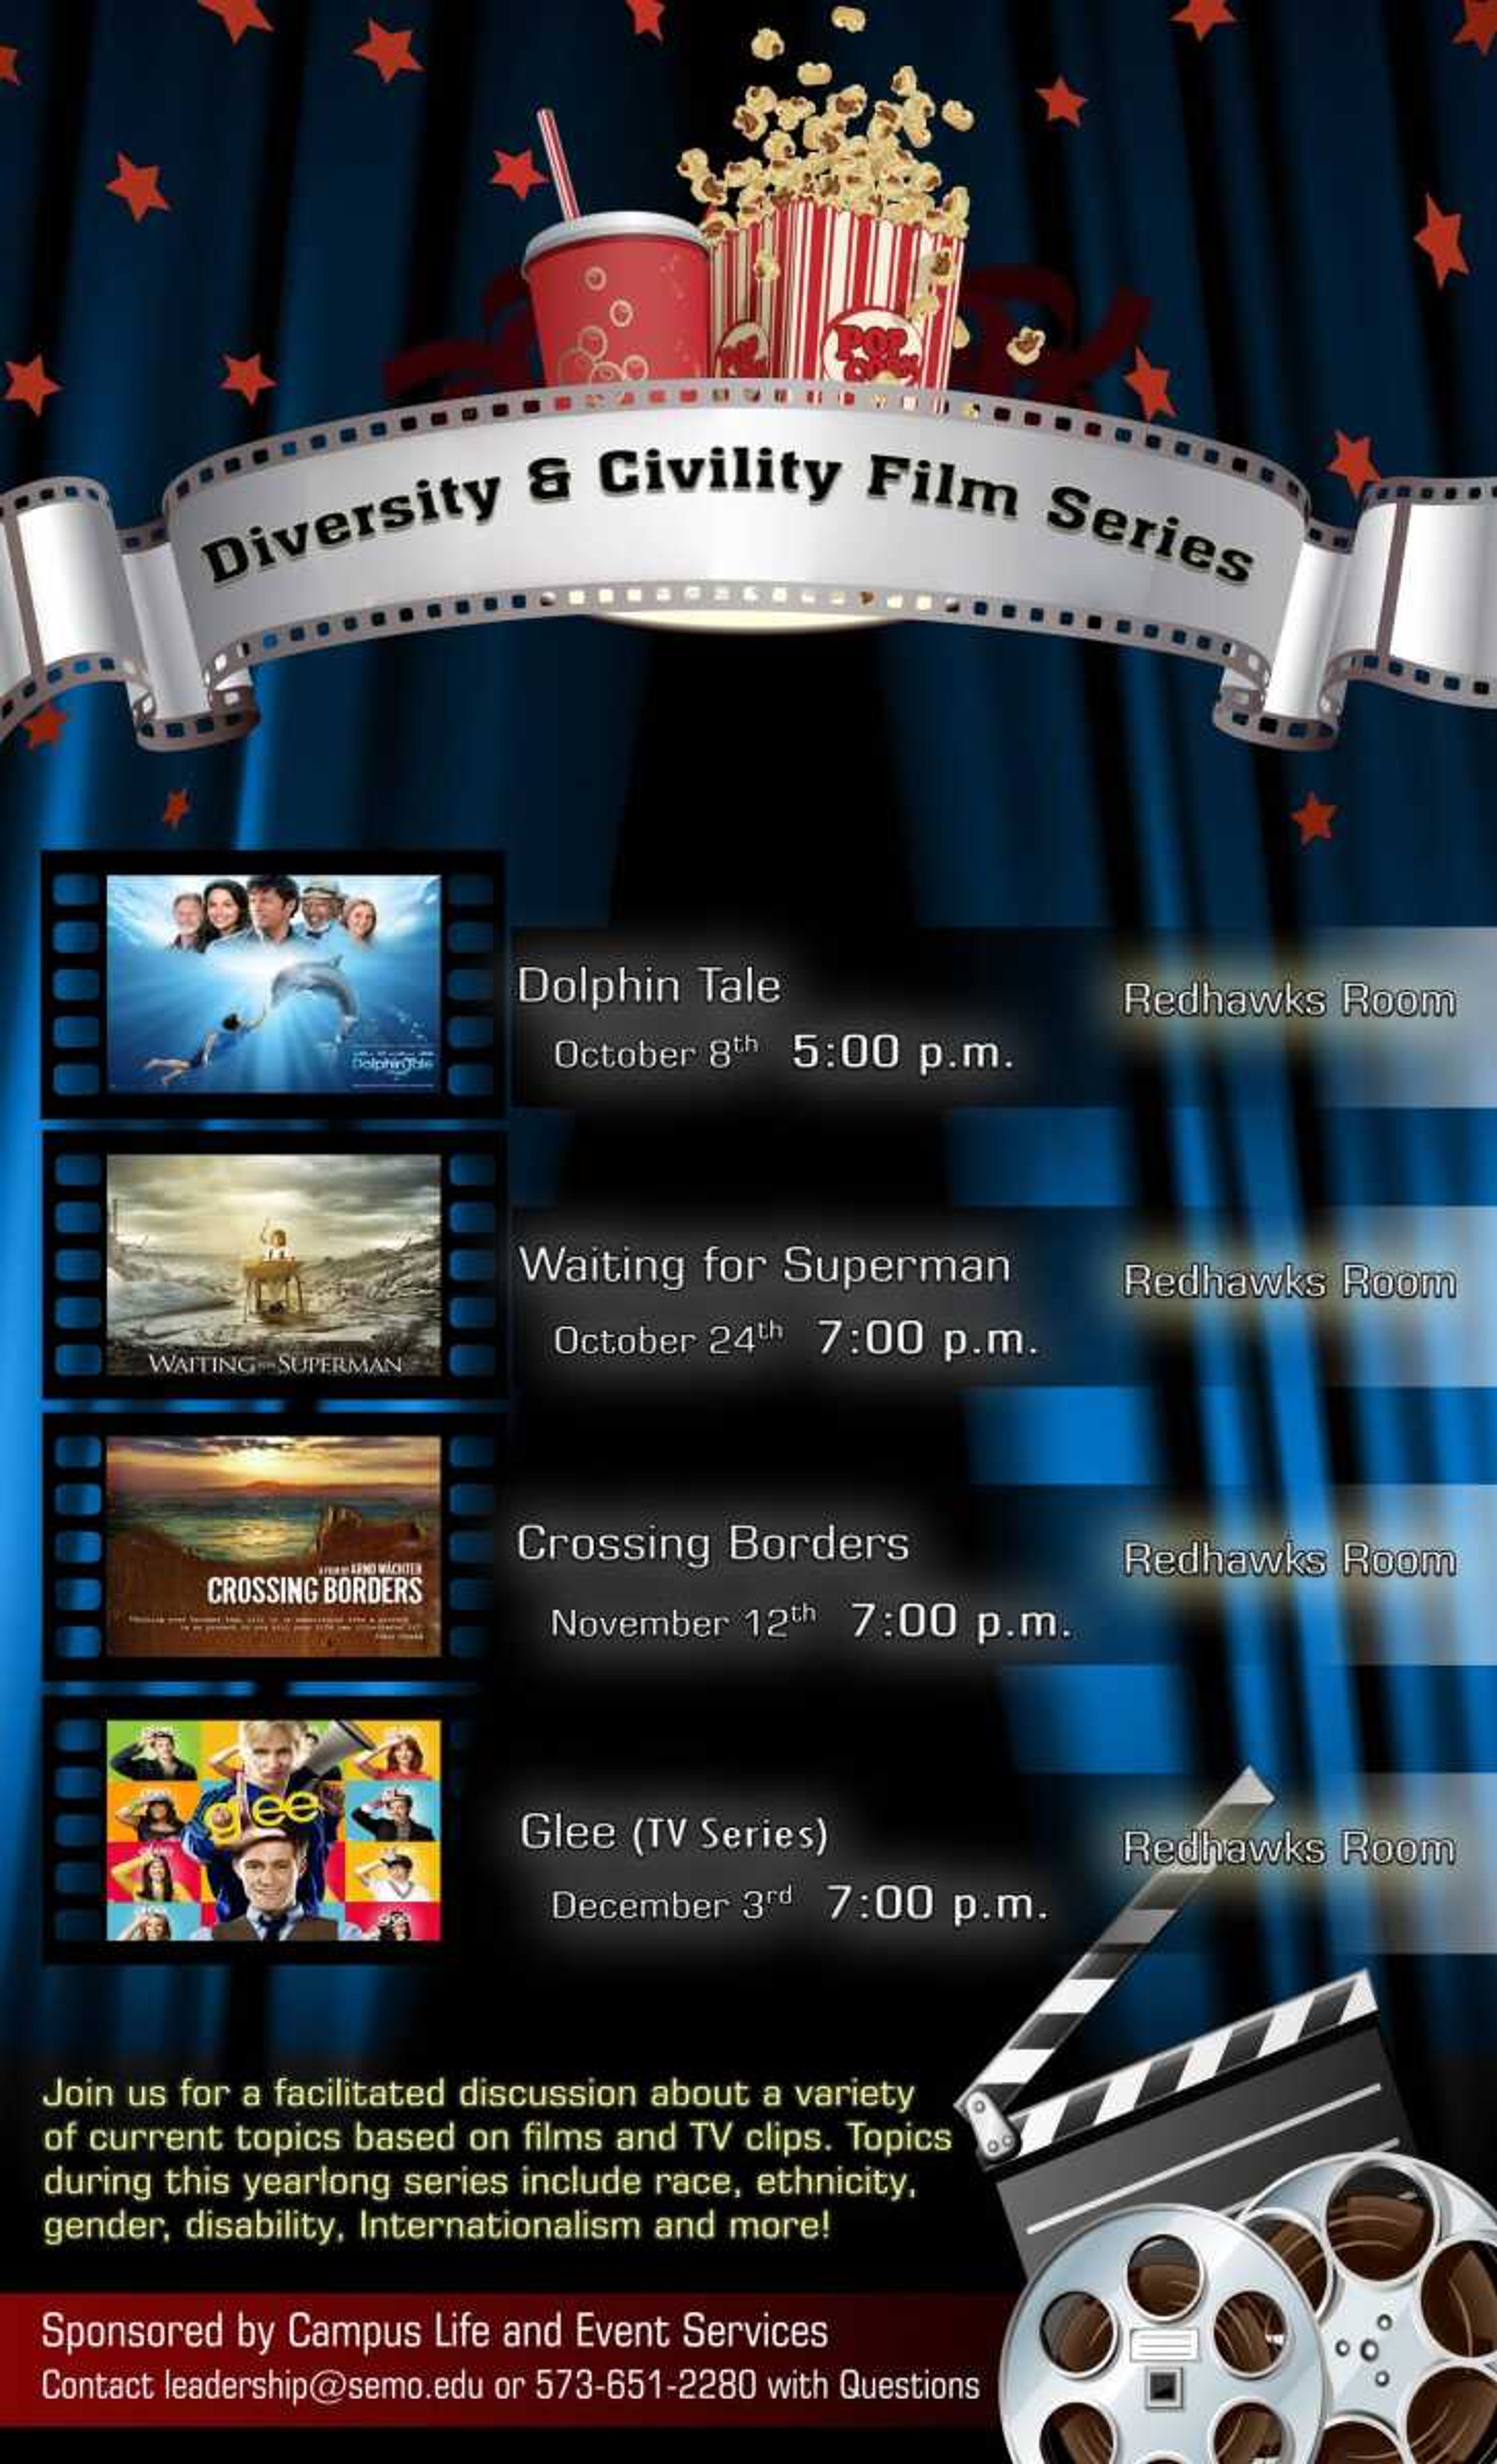 The upcoming events for the diversity & civility film series. Submitted photo